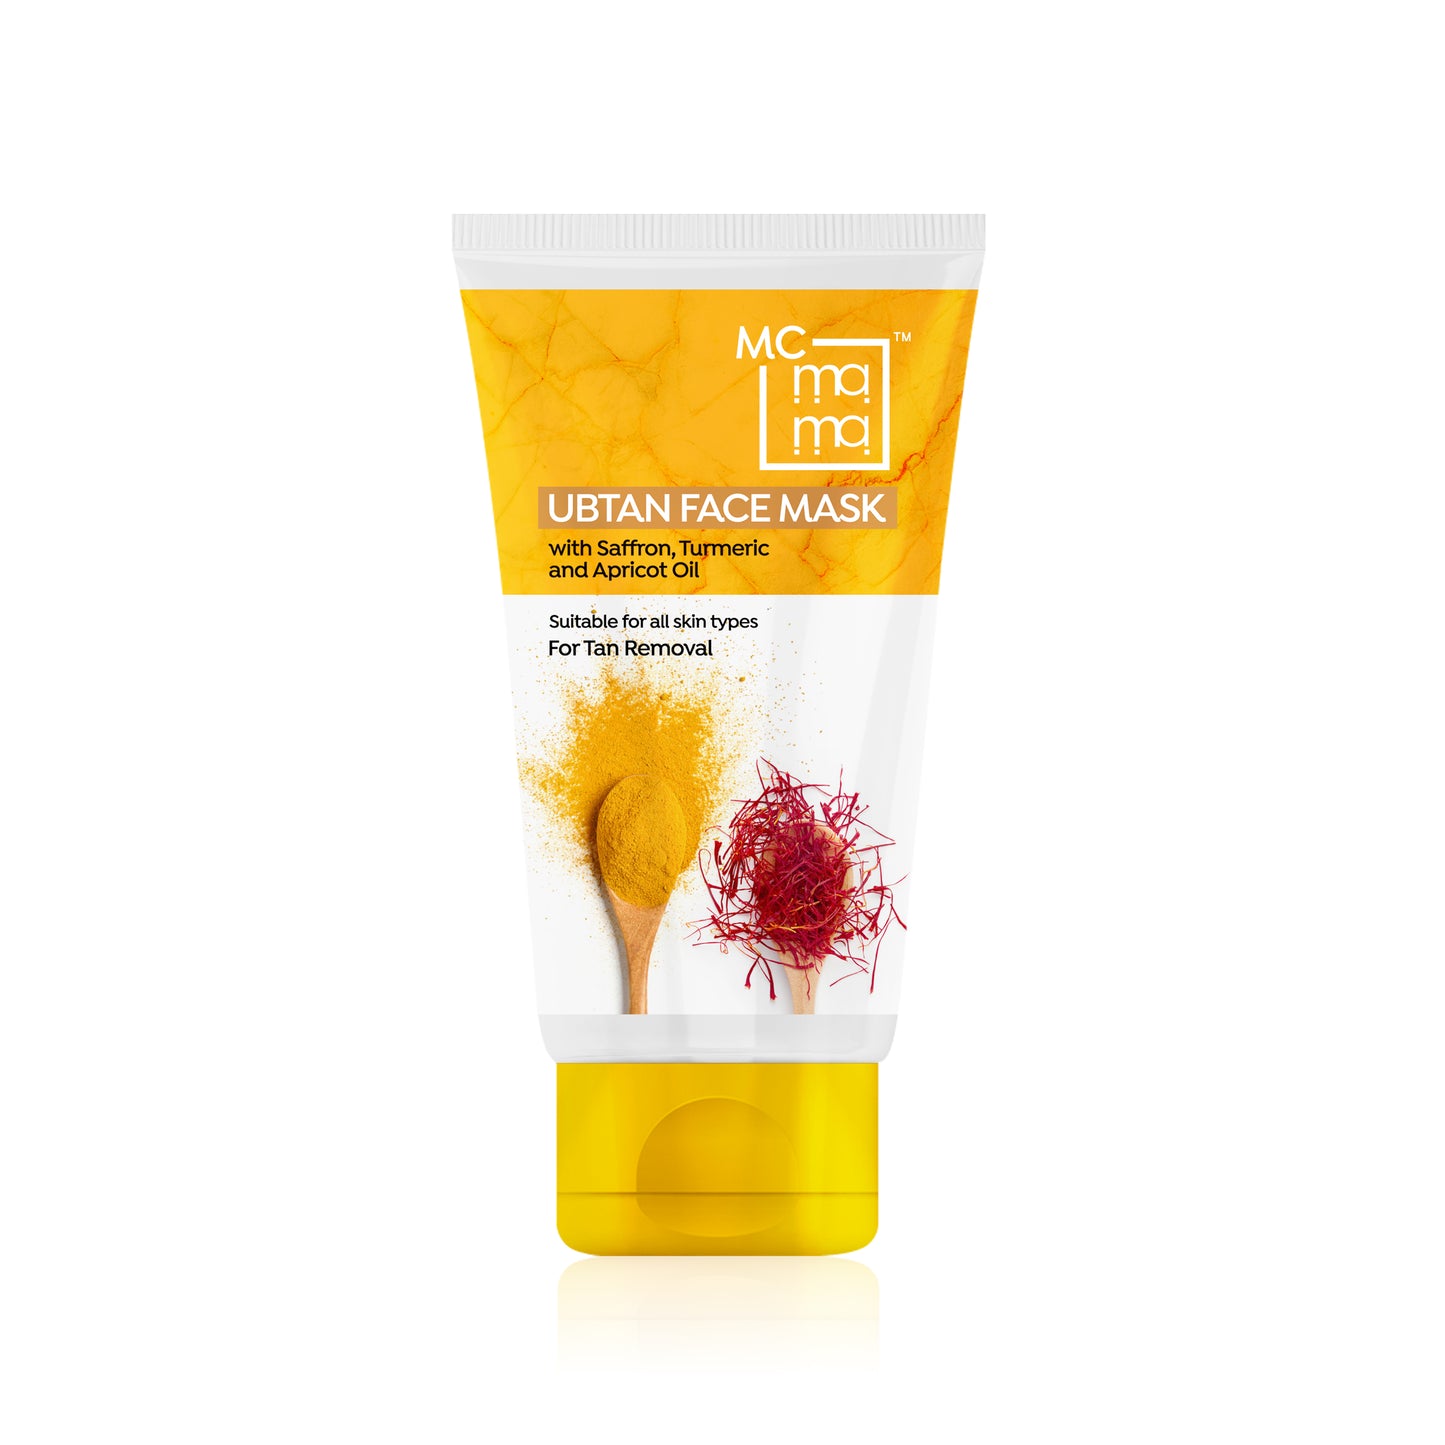 Ubtan Face Mask Tan Removal & Blemish Minimising Face Mask | Tanning & Glowing Skin | Fairness | Face Brightening Ubtan Face Mask With Saffron & Turmeric | 200g